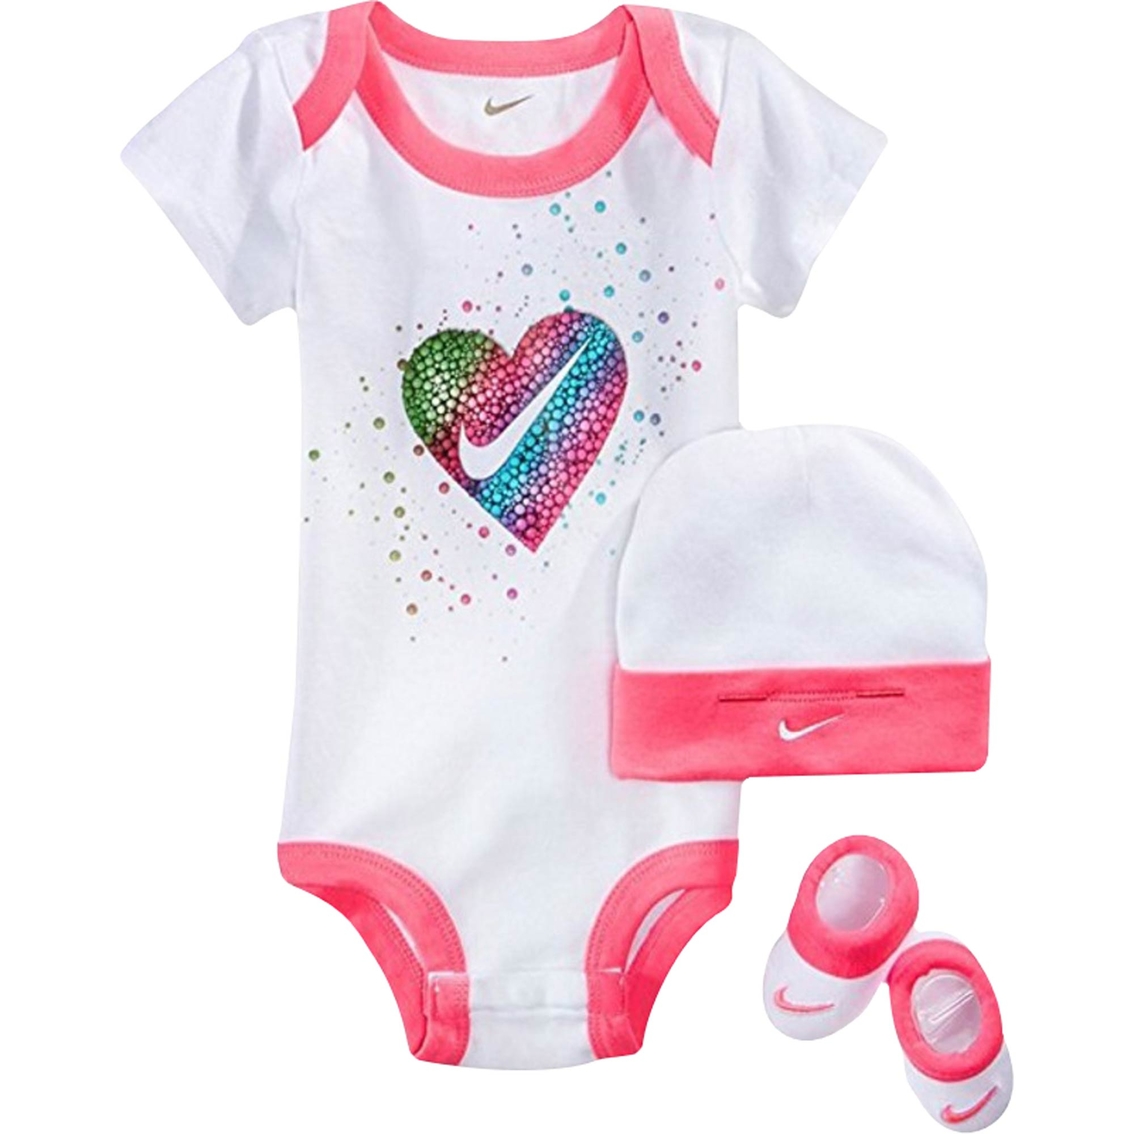 nike infant girl clothes